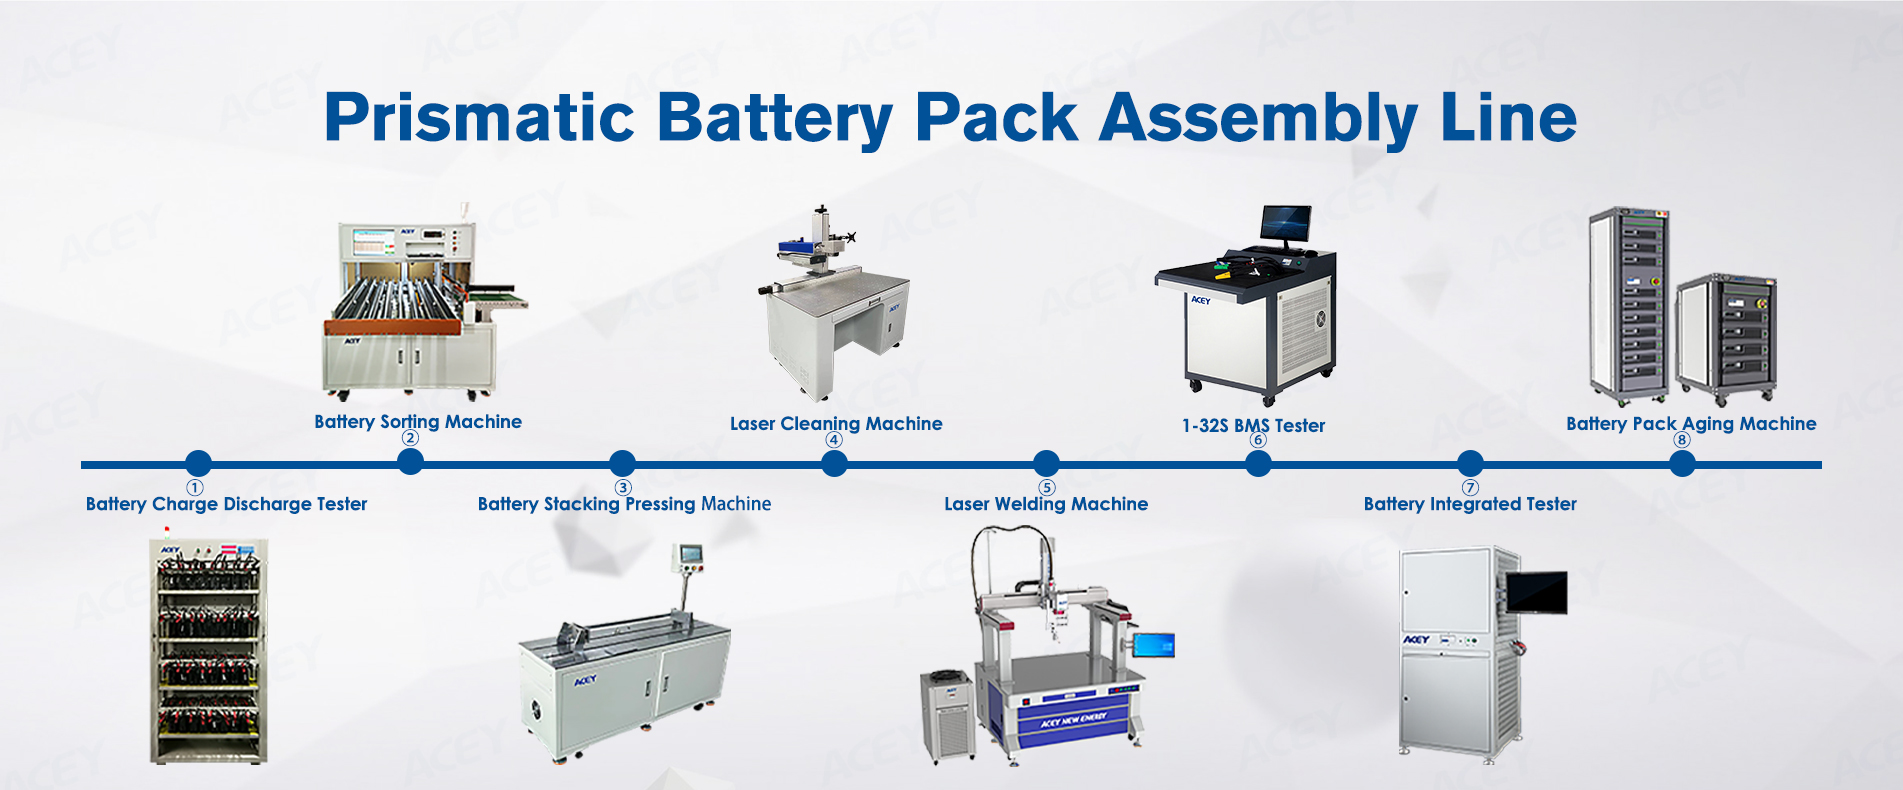 Prismatic Battery Pack Assembly Line